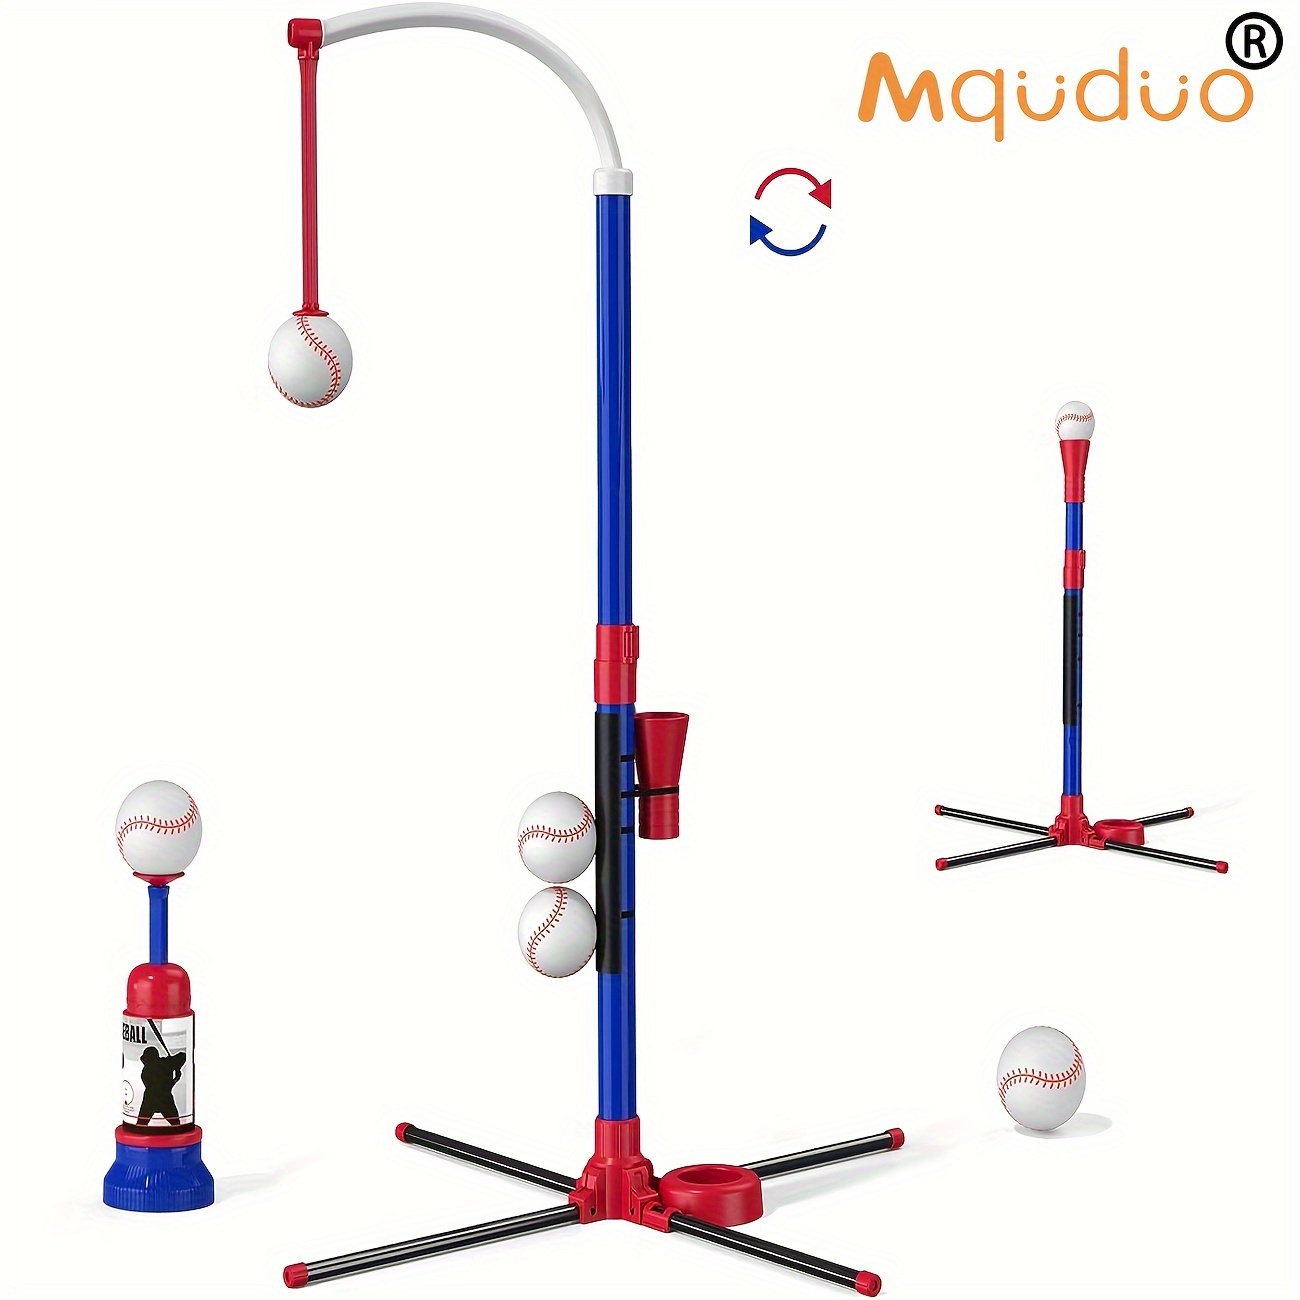 

3 In 1 Kids Baseball Toy Set, For Kids 3-5 Years Old, With Hanging Ball Holder/standing T-ball/auto Launcher/6 Baseballs, Adjustable Height Toddler Baseball Set Indoor Outdoor Sports Gift Toy